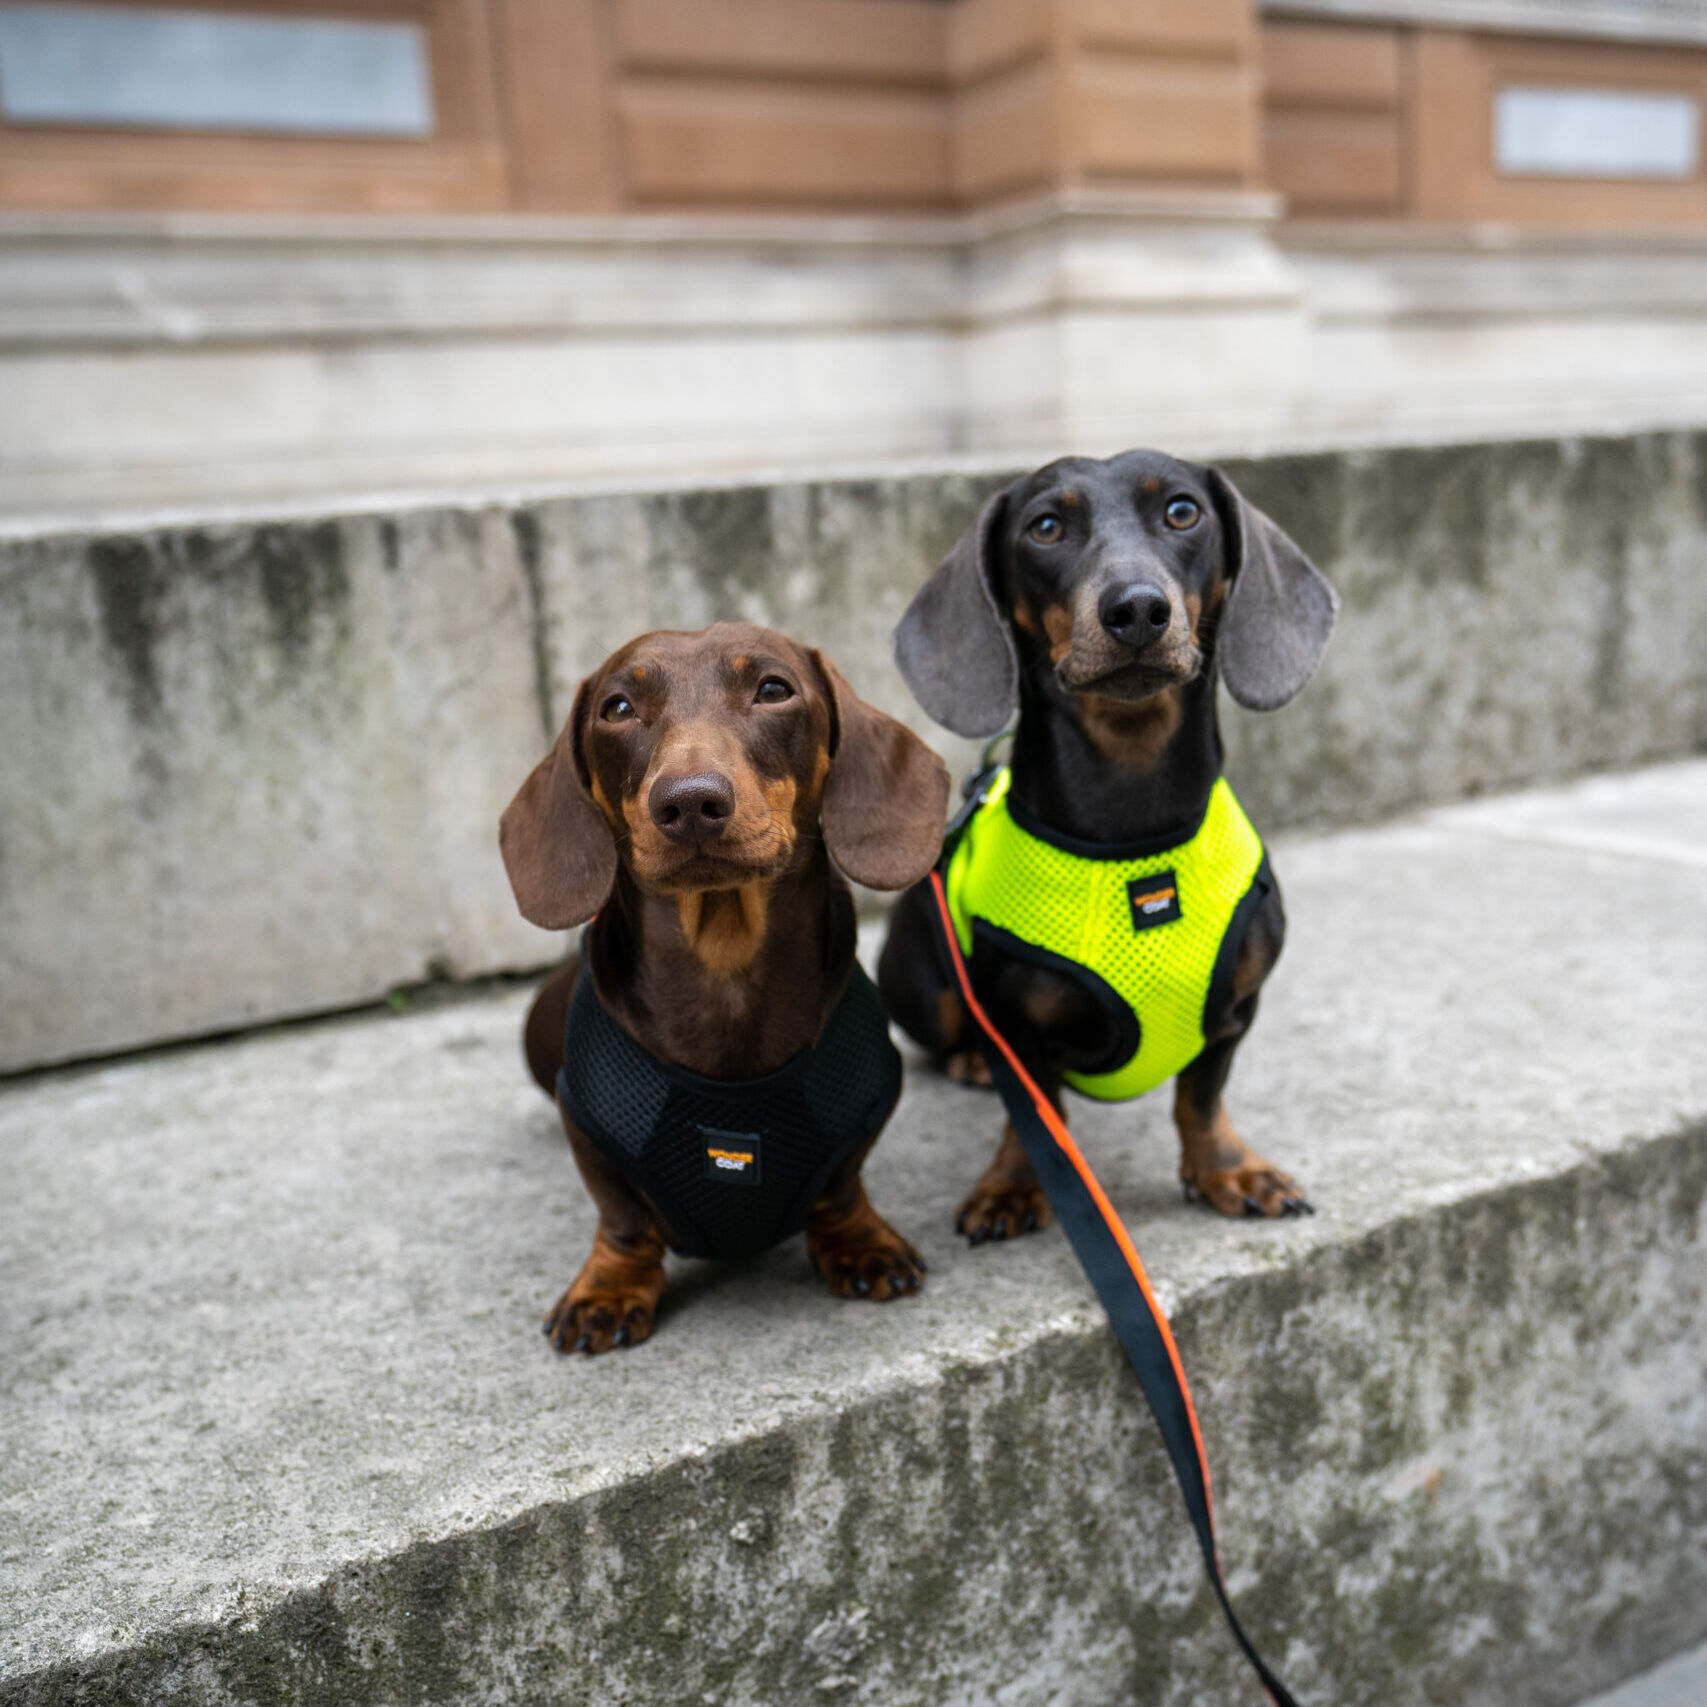 Two dachshunds wearing Wondercoat Technical fleece and harness in black and yellow